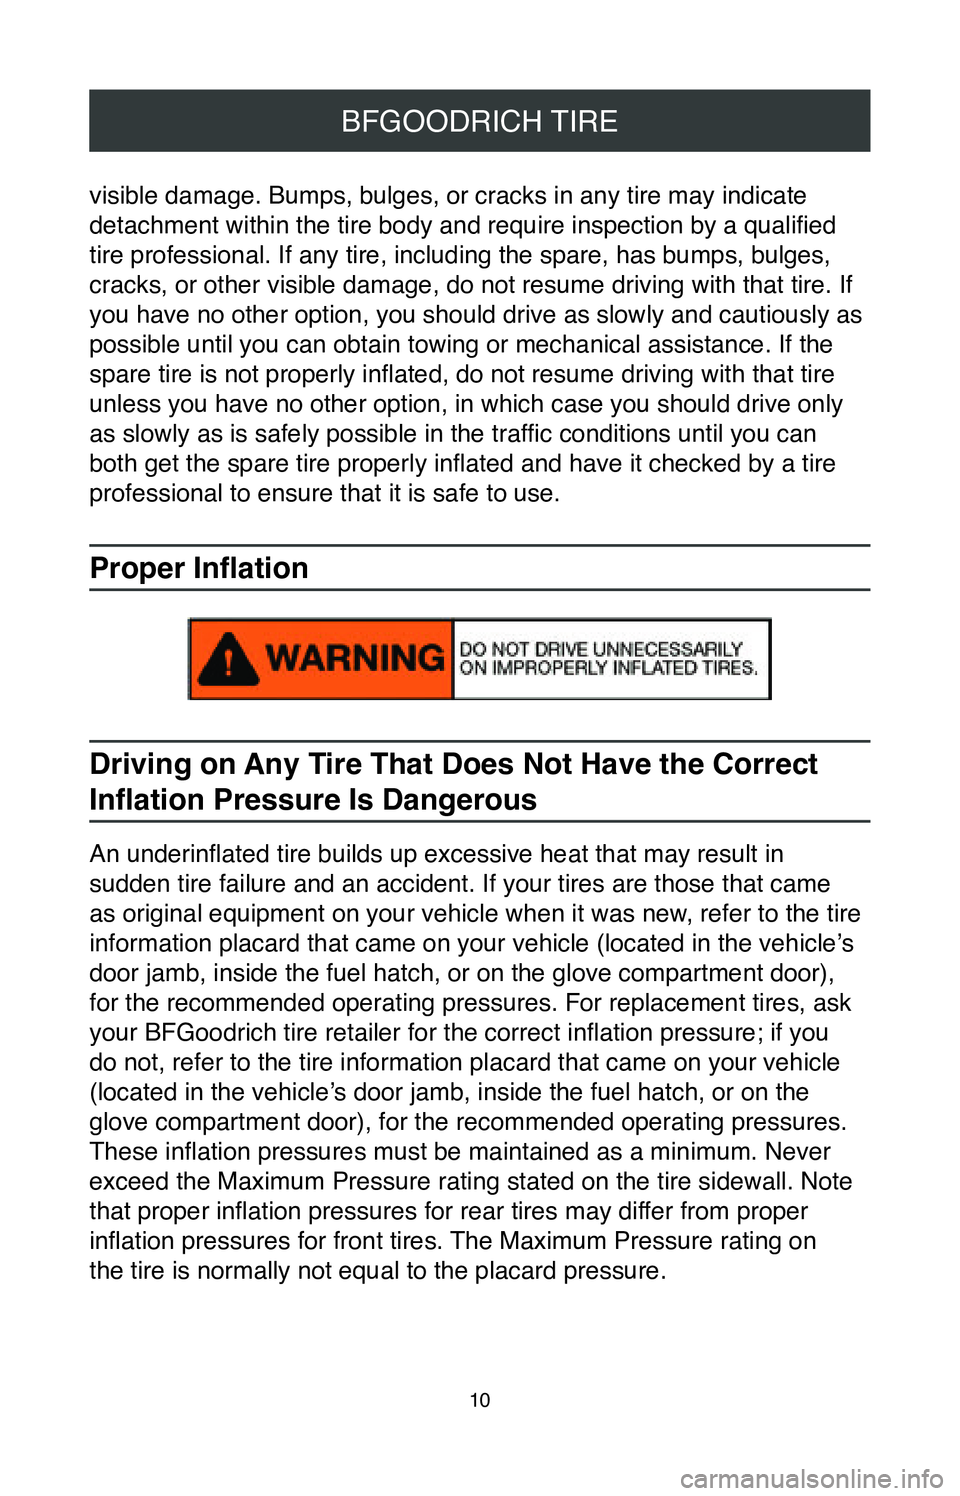 TOYOTA YARIS 2020  Warranties & Maintenance Guides (in English) 10
BFGOODRICH TIRE
visible damage. Bumps, bulges, or cracks in any tire may indicate 
detachment within the tire body and require inspection by a qualified 
tire professional. If any tire, including t